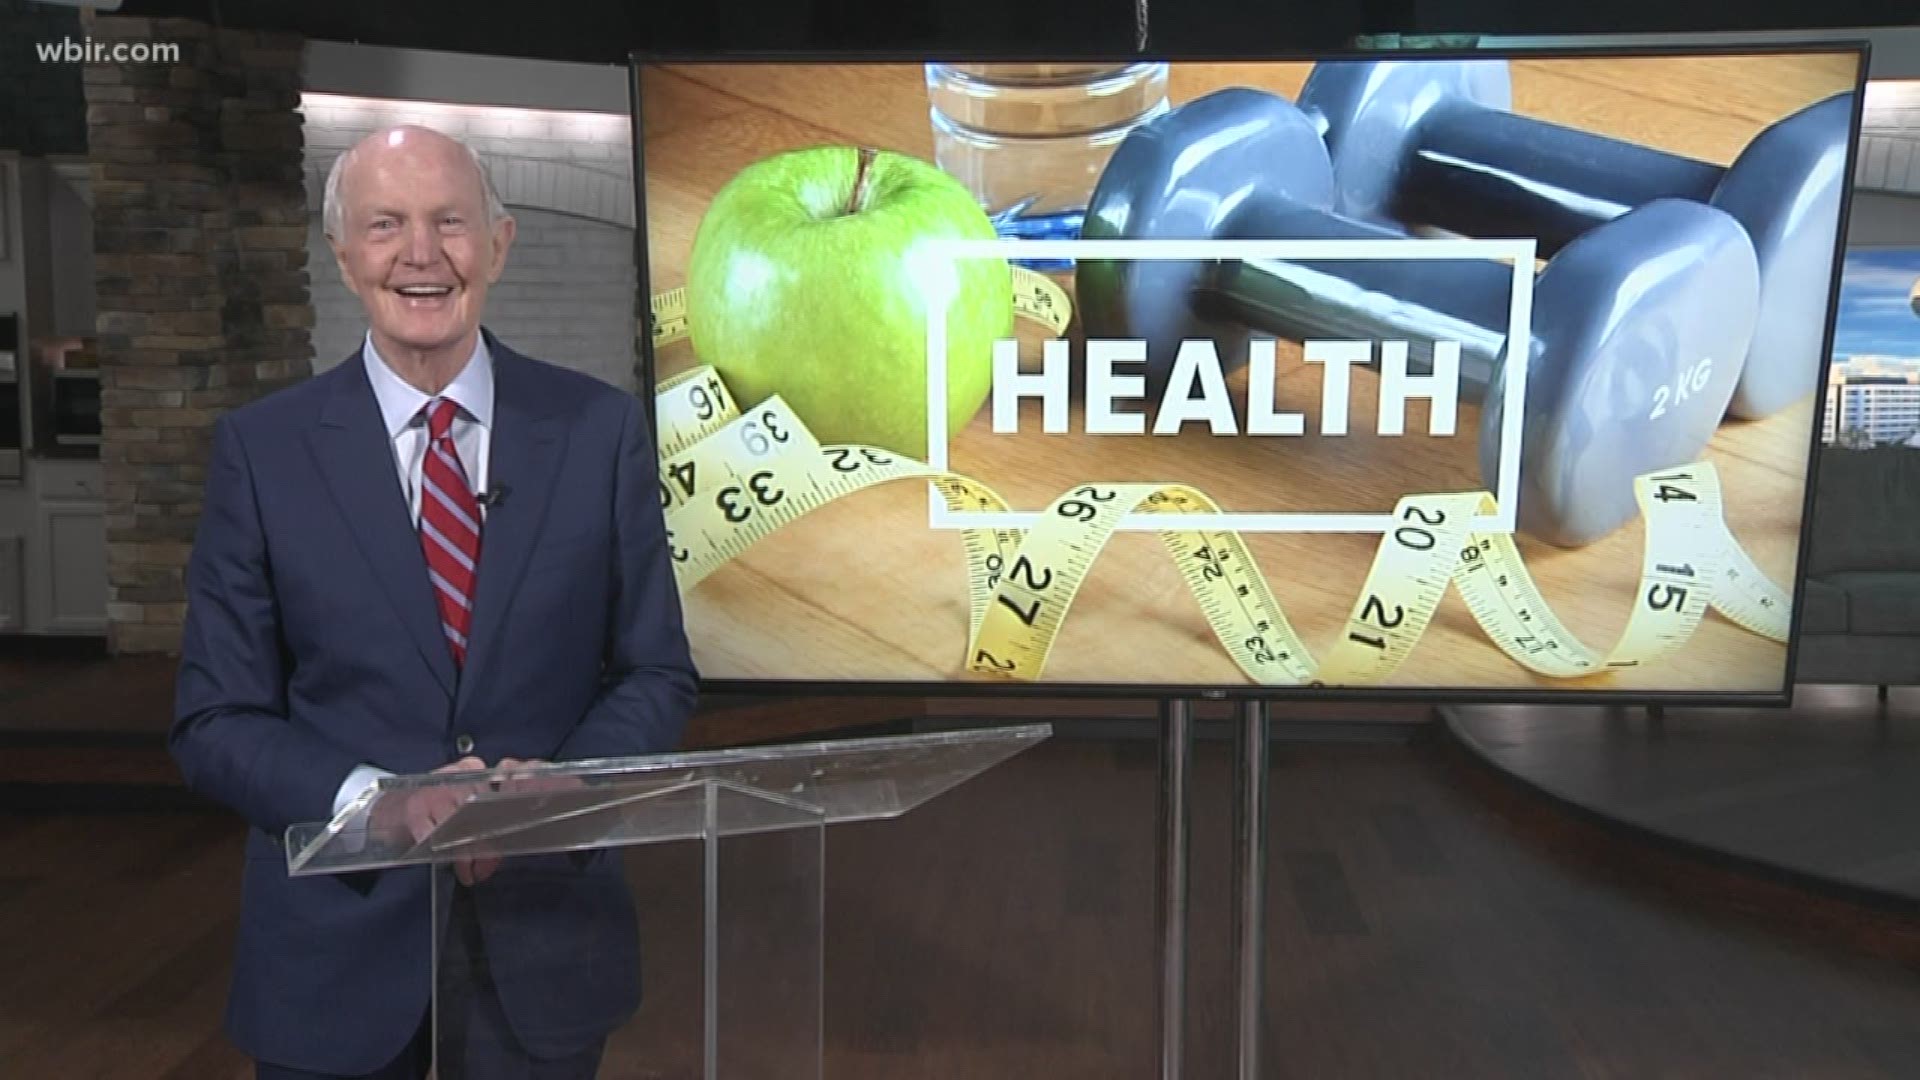 Dr. Bob said Metabolic Syndrome is a grouping of several risk factors that increase the risk of heart disease.